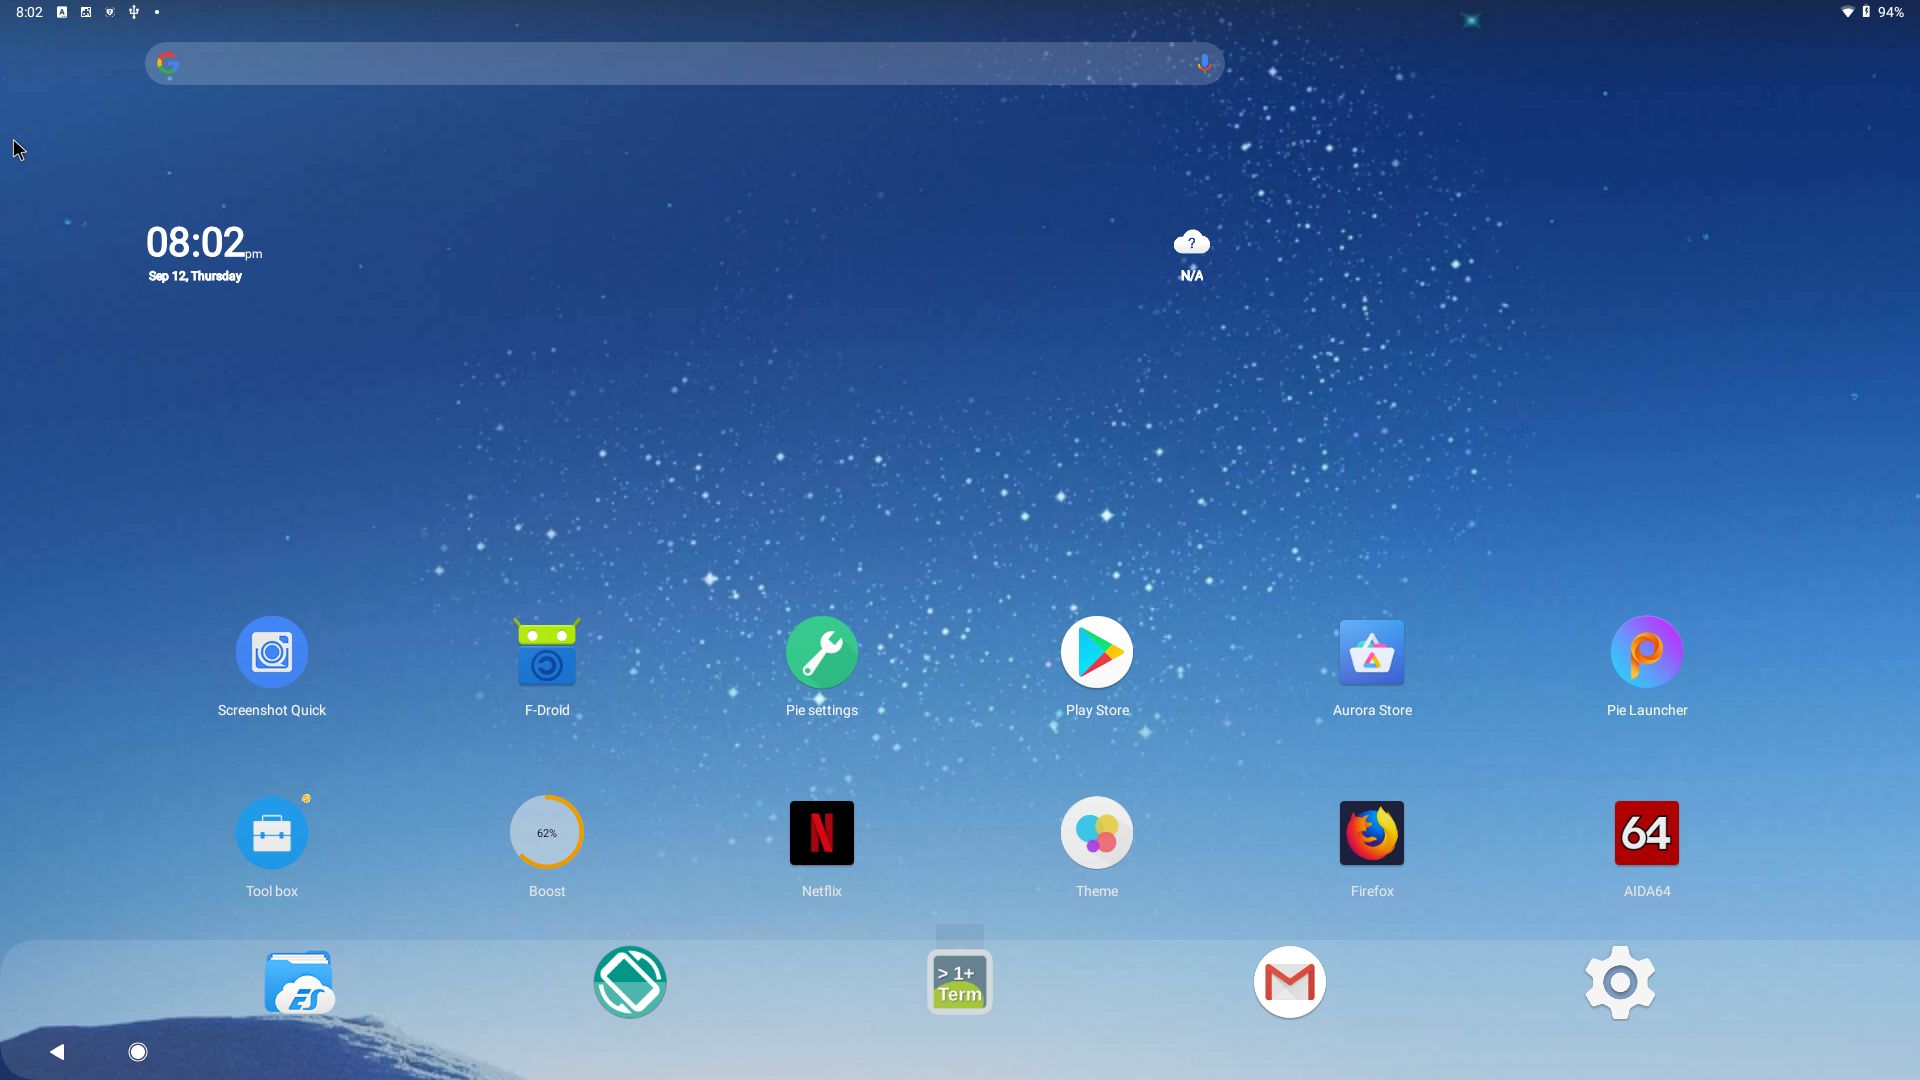 Latest] Google Play Store 6.0.0 APK Free Download For Android - Pcnexus